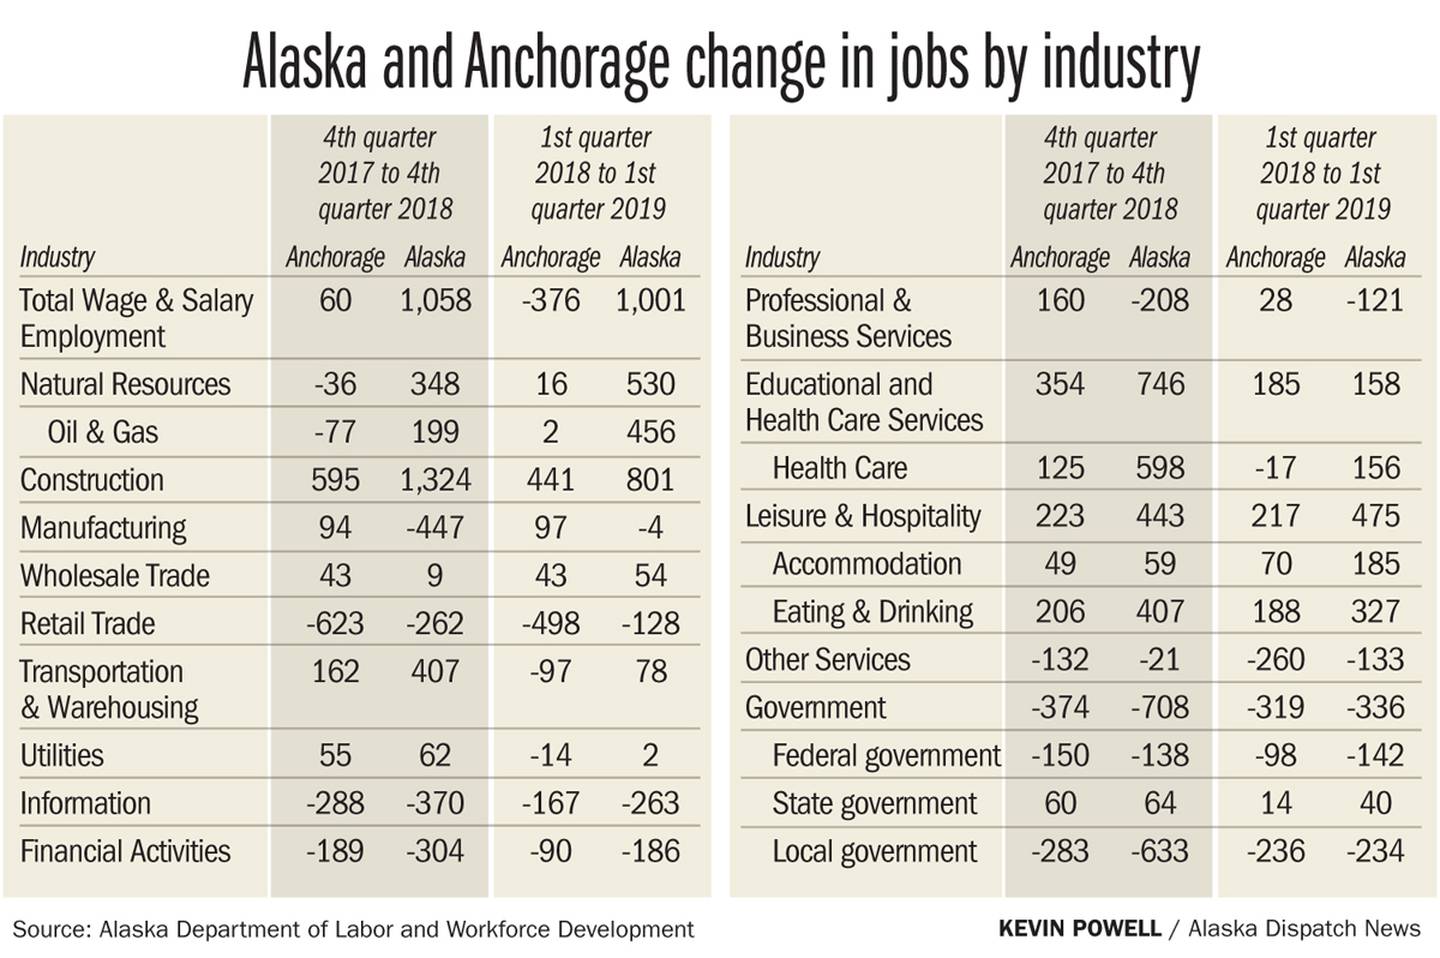 Alaska and Anchorage change in jobs by industry